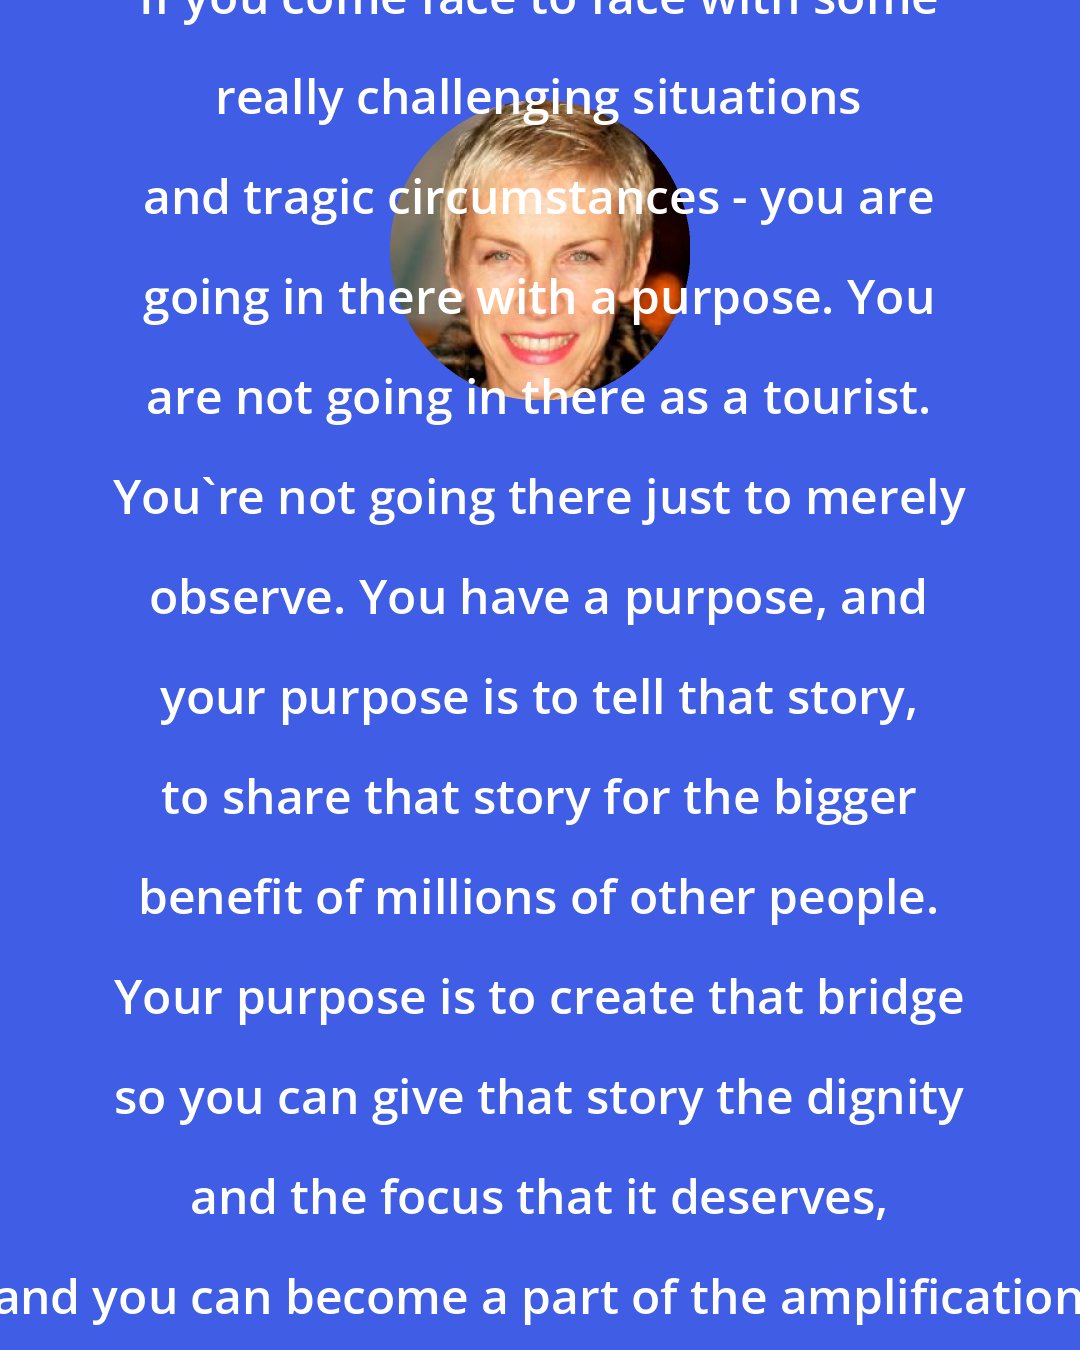 Annie Lennox: If you come face to face with some really challenging situations and tragic circumstances - you are going in there with a purpose. You are not going in there as a tourist. You're not going there just to merely observe. You have a purpose, and your purpose is to tell that story, to share that story for the bigger benefit of millions of other people. Your purpose is to create that bridge so you can give that story the dignity and the focus that it deserves, and you can become a part of the amplification that needs to be there.